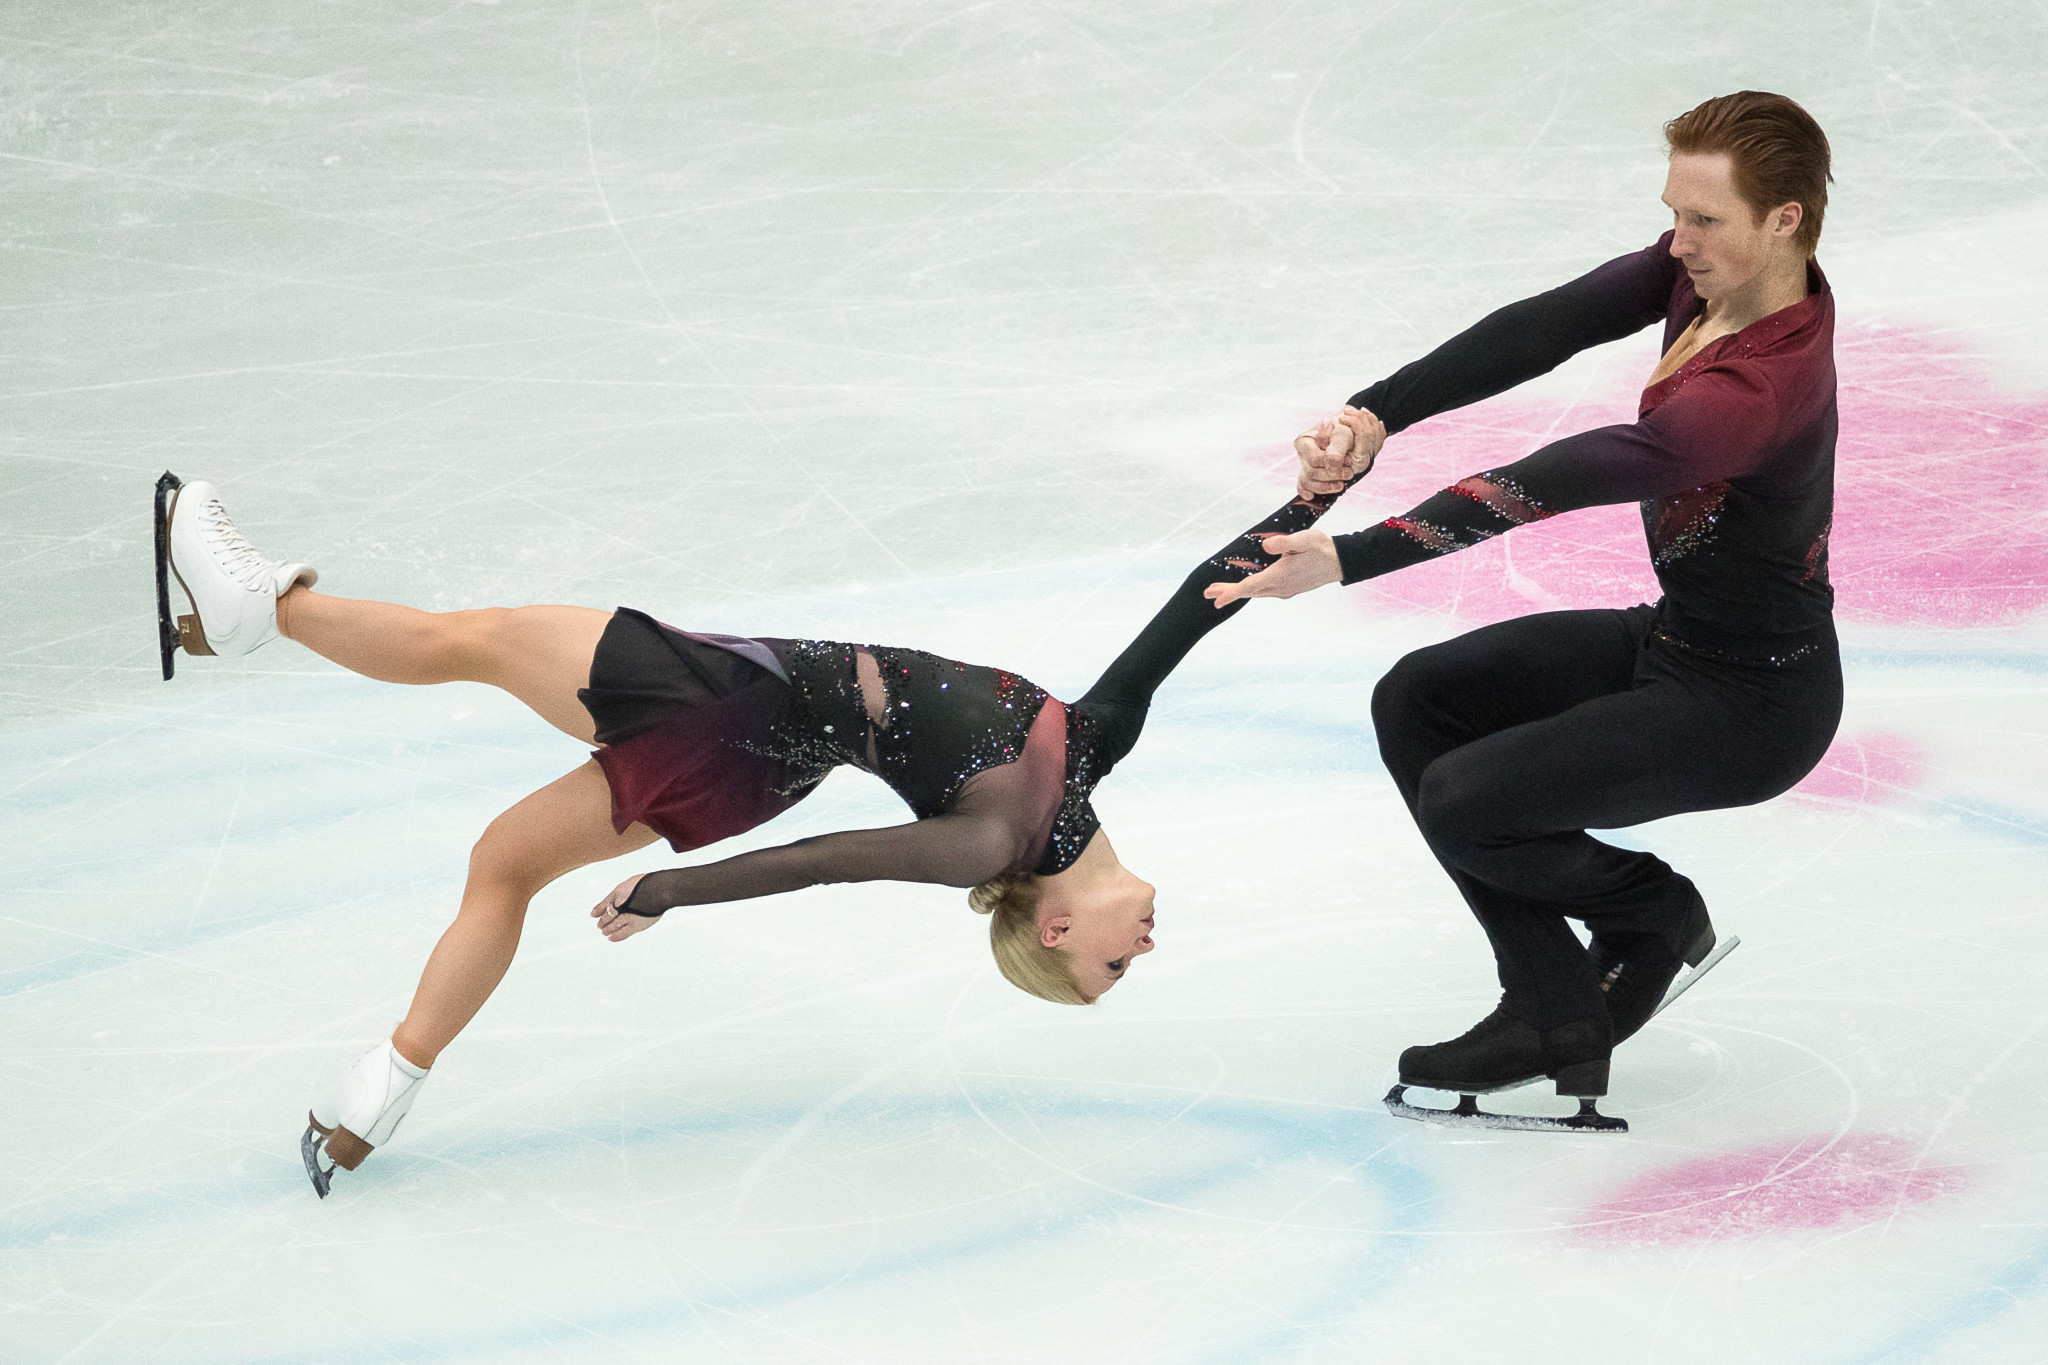 Russia's Evgenia Tarasova and Vladimir Morozov lead at the halfway point of the pairs competition ©Getty Images